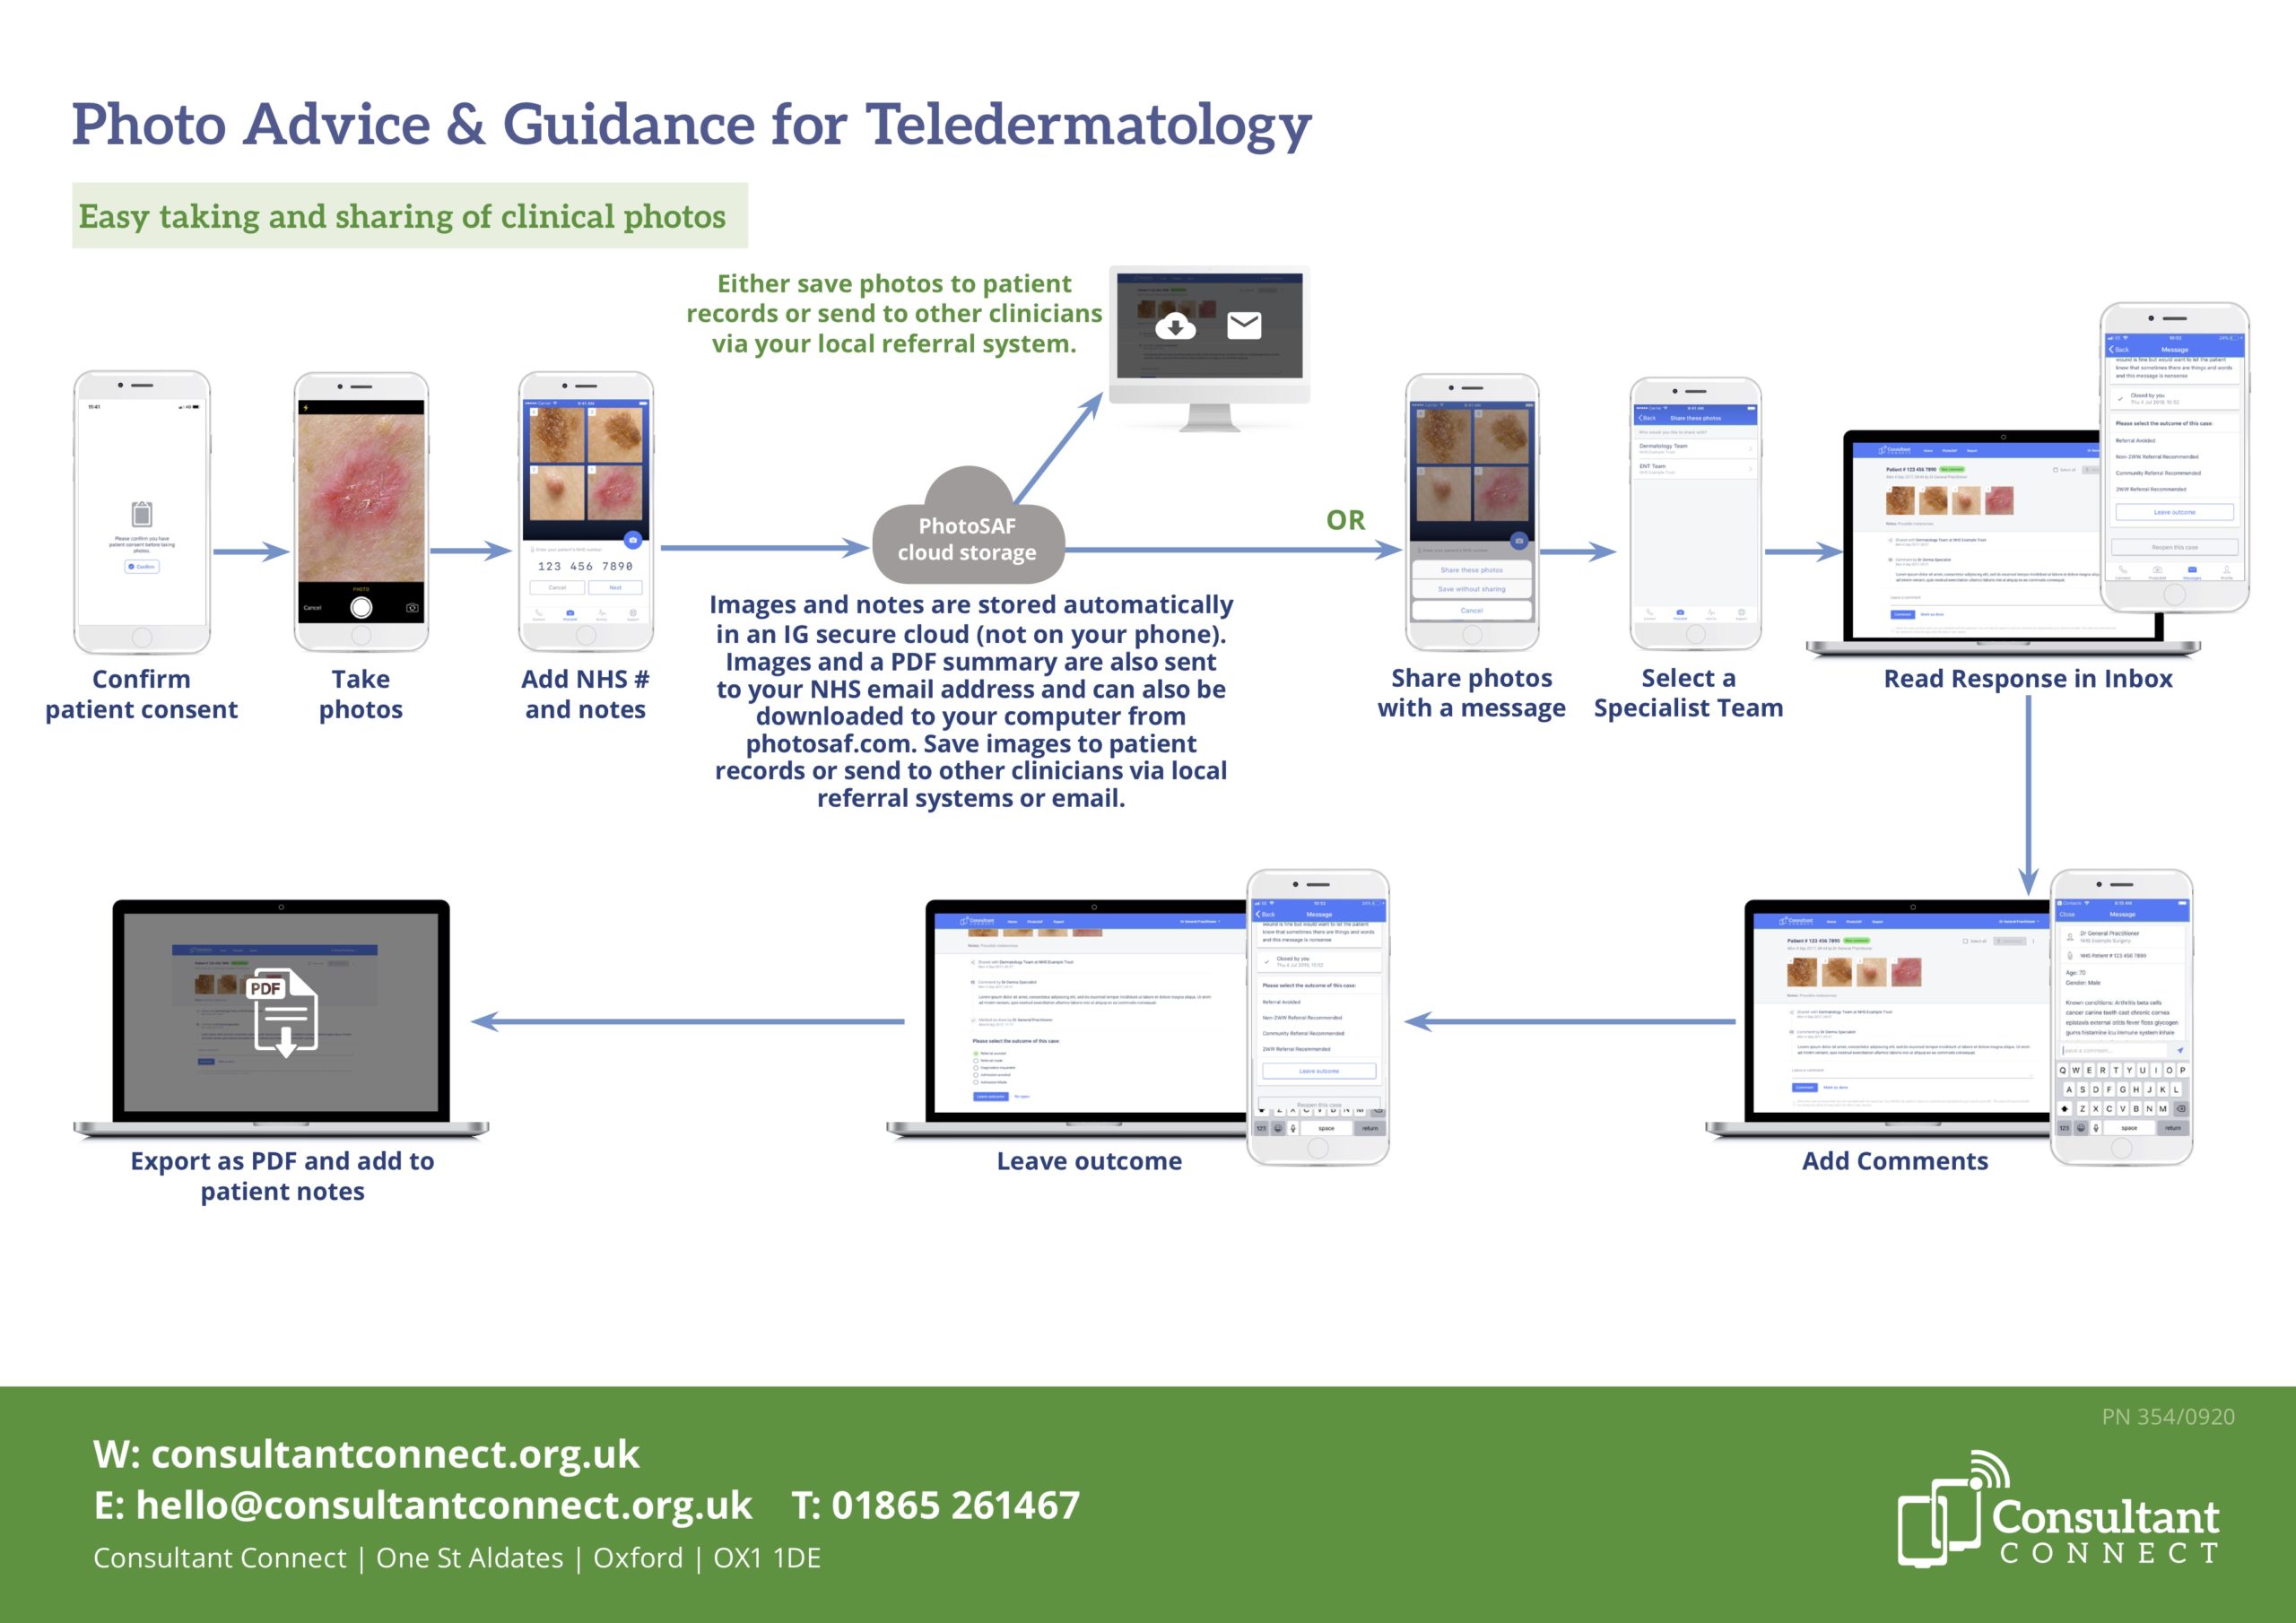 Photo Advice & Guidance for NHS Teledermatology - Consultant Connect